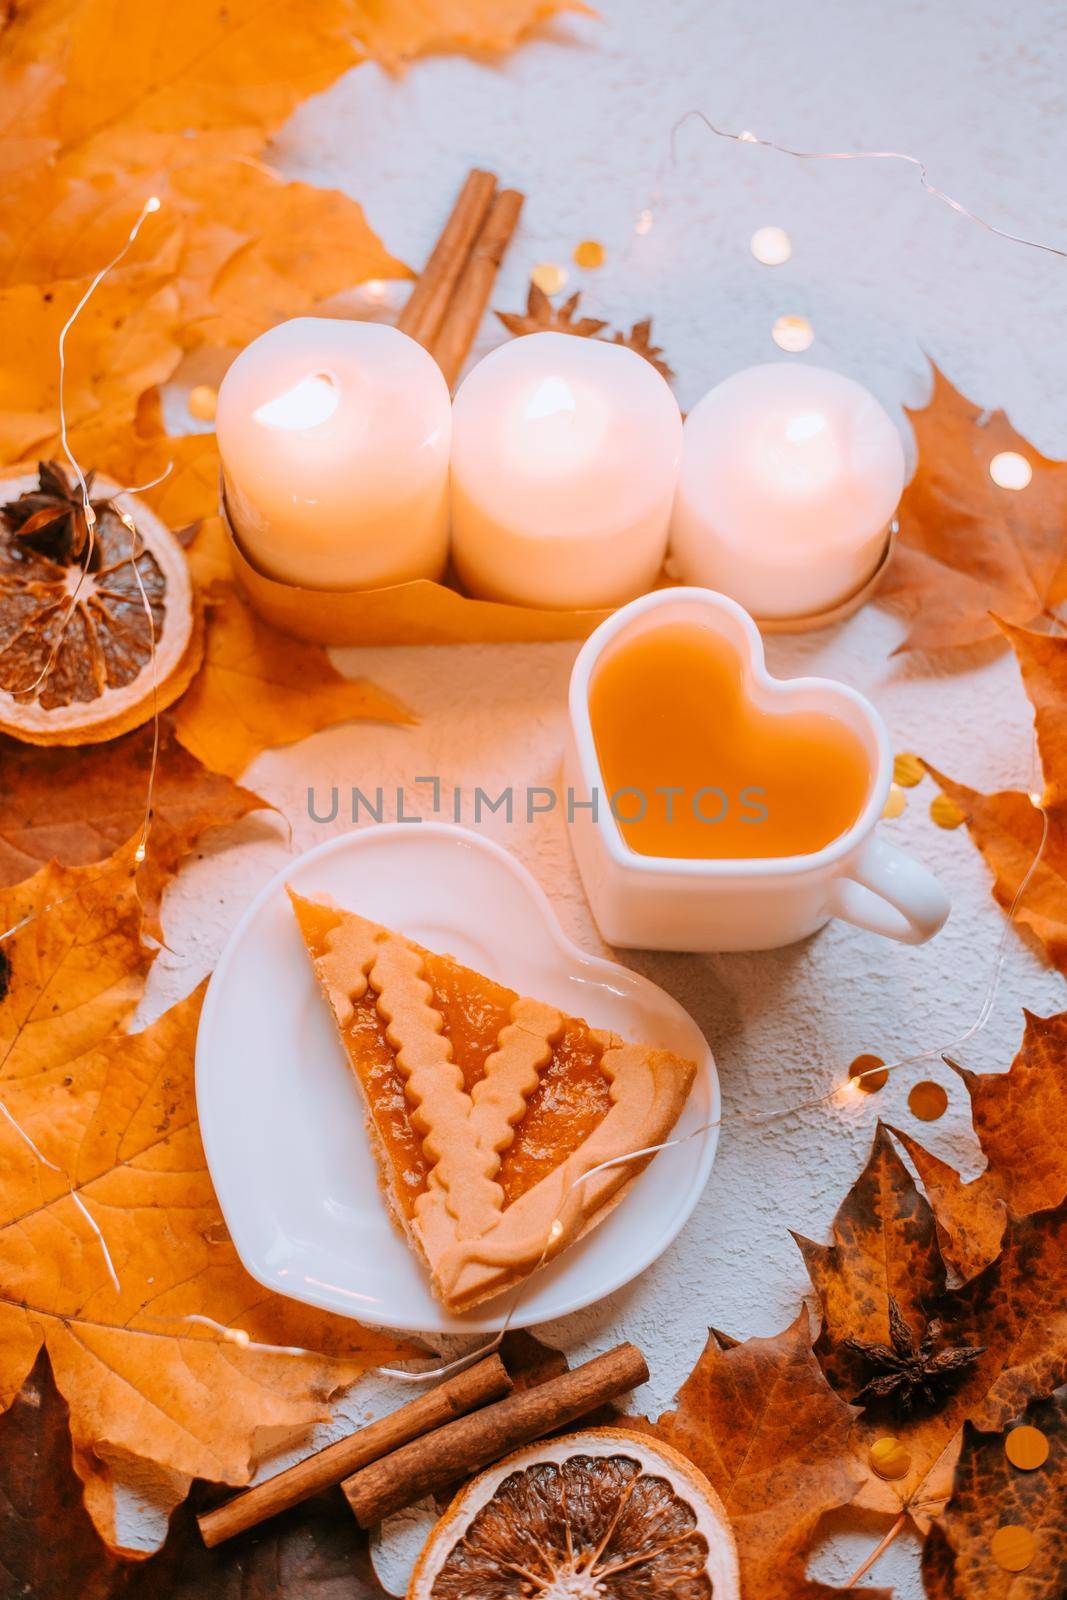 Autumn tea party with cake . Cosiness. Autumn article. Photos for printed products. Autumn. Autumn leaves